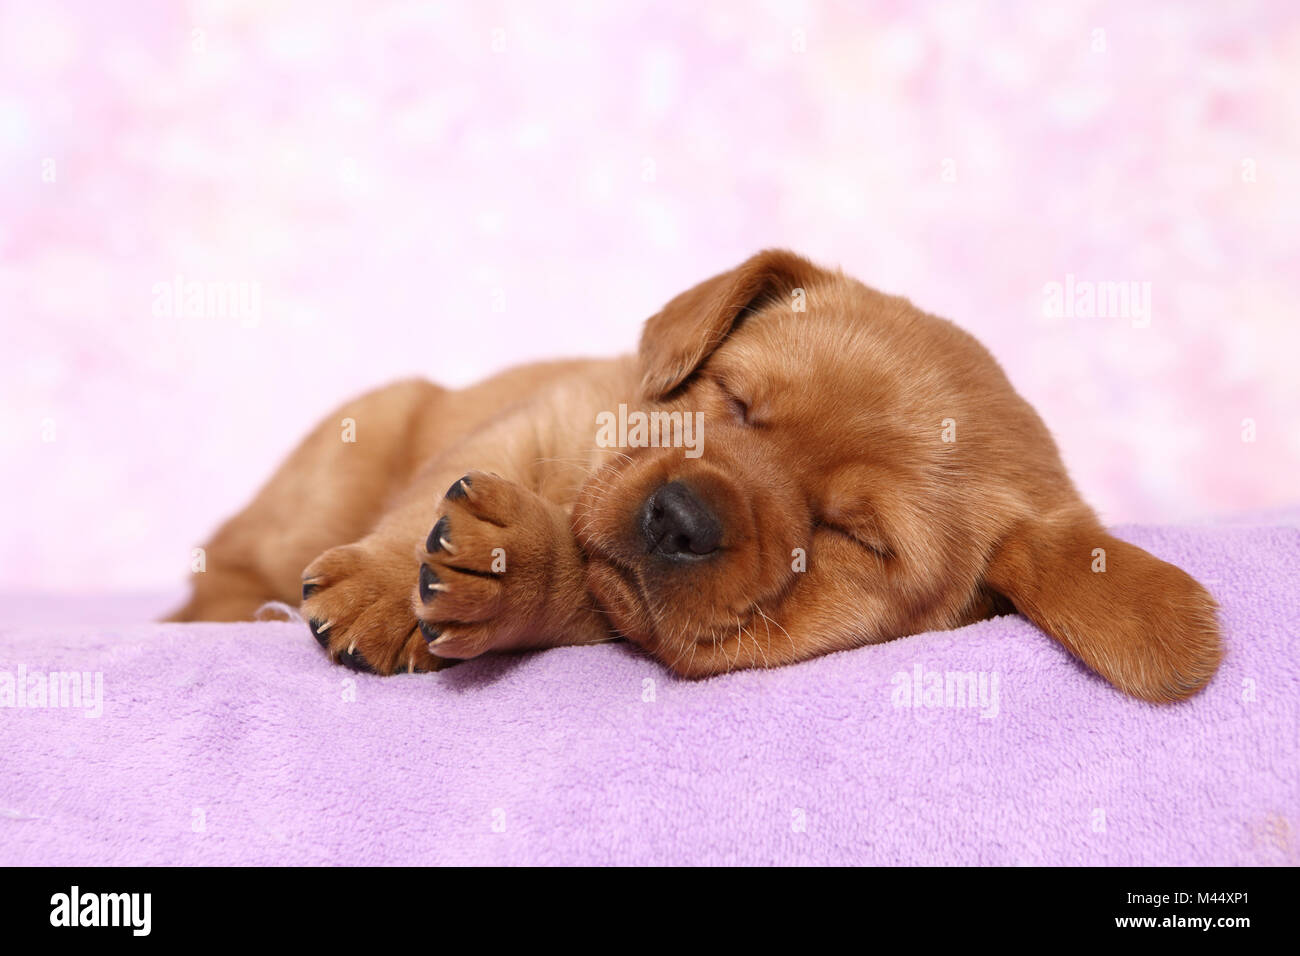 Labrador Retriever. Puppy (6 weeks old) sleeping on a blanket. Studio picture seen against a pink background. Germany Stock Photo